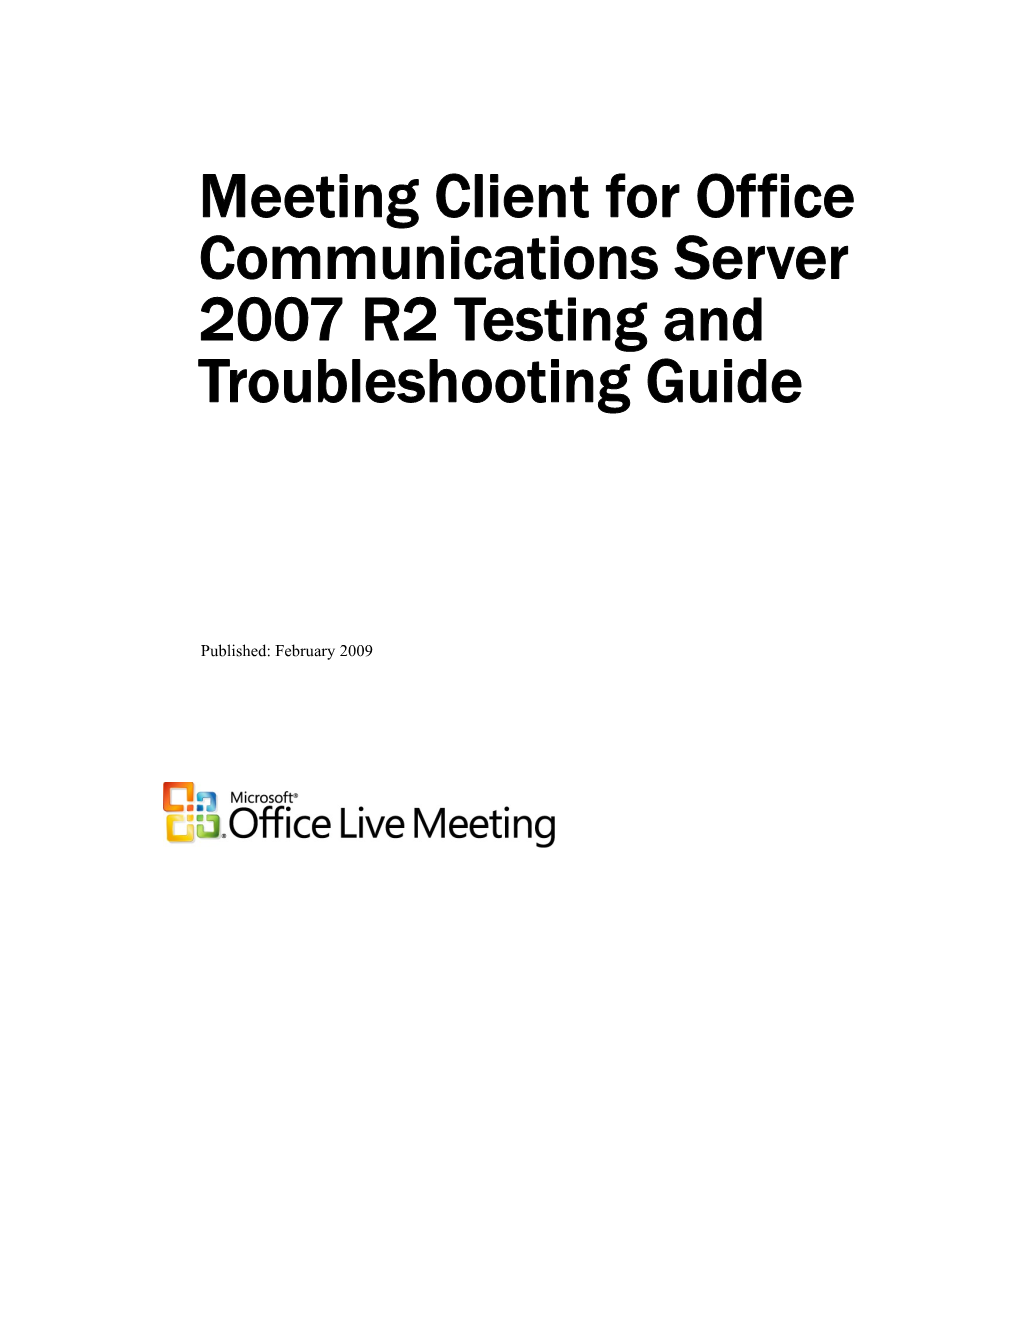 Meeting Client for Office Communications Server 2007 R2 Testing and Troubleshooting Guide